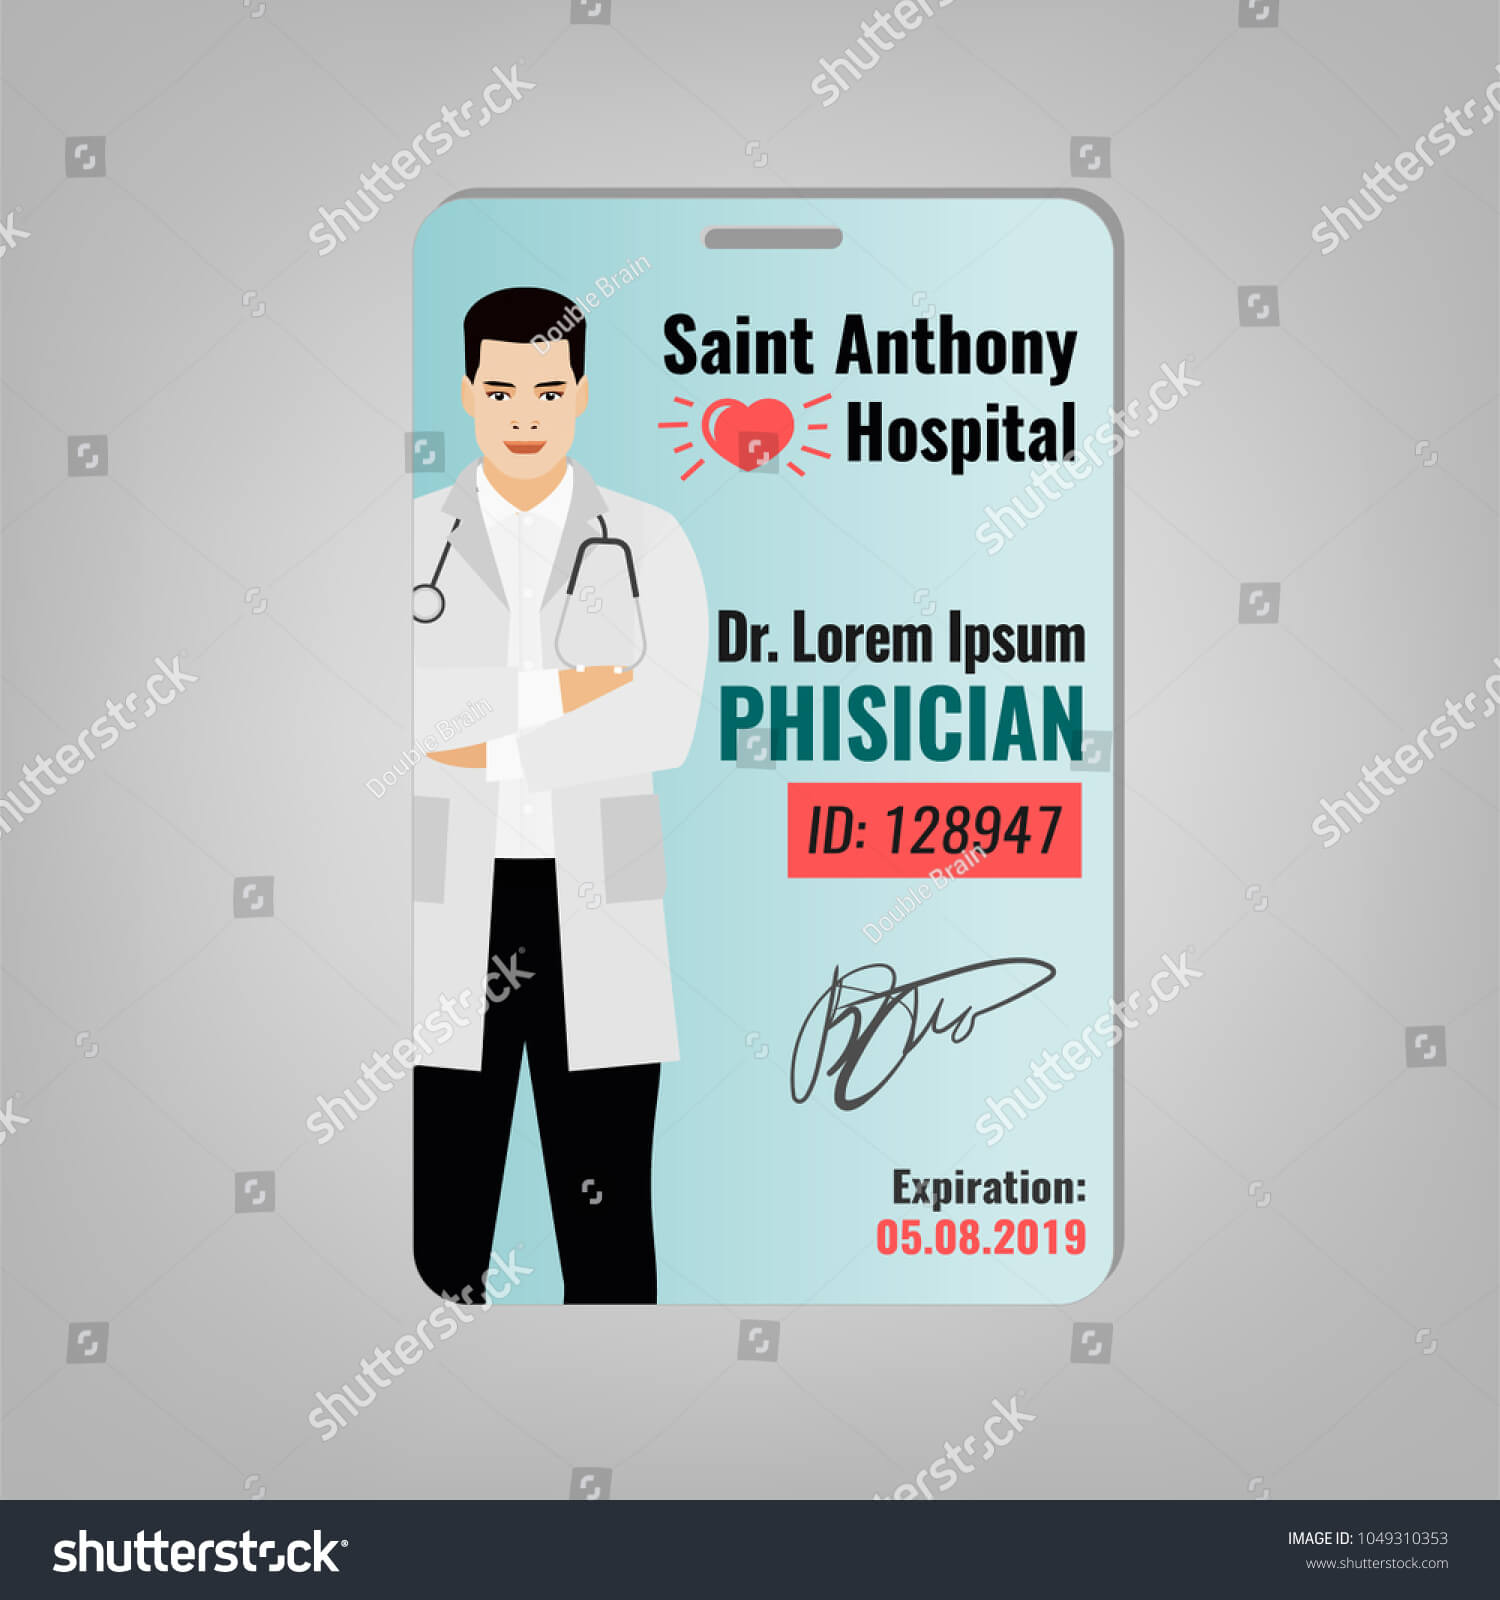 Doctors Id Card Hospital Logo Phisician Stock Image Intended For Hospital Id Card Template